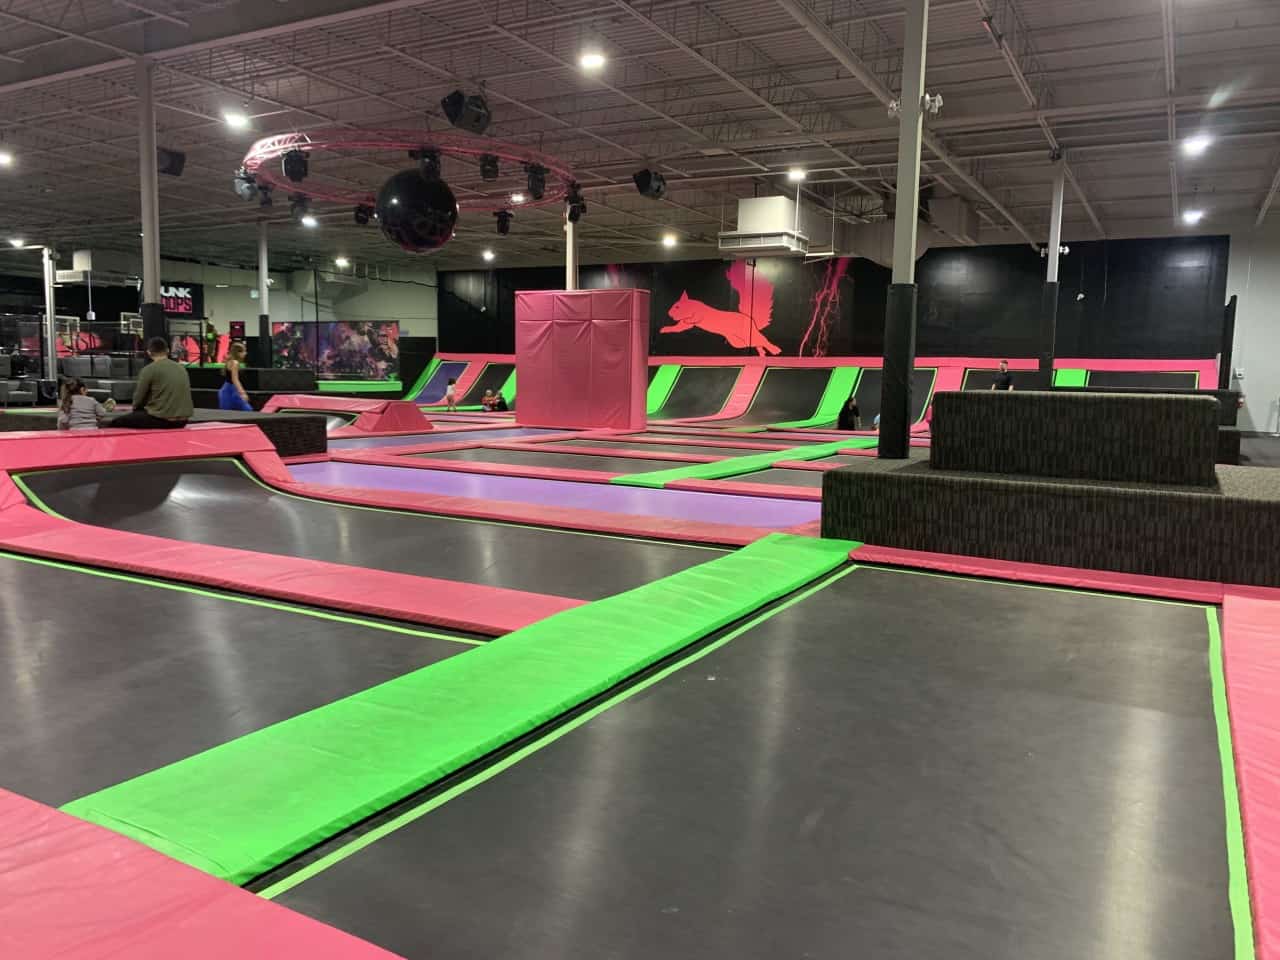 A Room of Trampolines at Flying Squirrel Trampoline - Flying Squirrel Indoor Trampoline Park in Hamilton, Ontario, Canada provides guests with a full room of trampolines of various shapes and sizes.